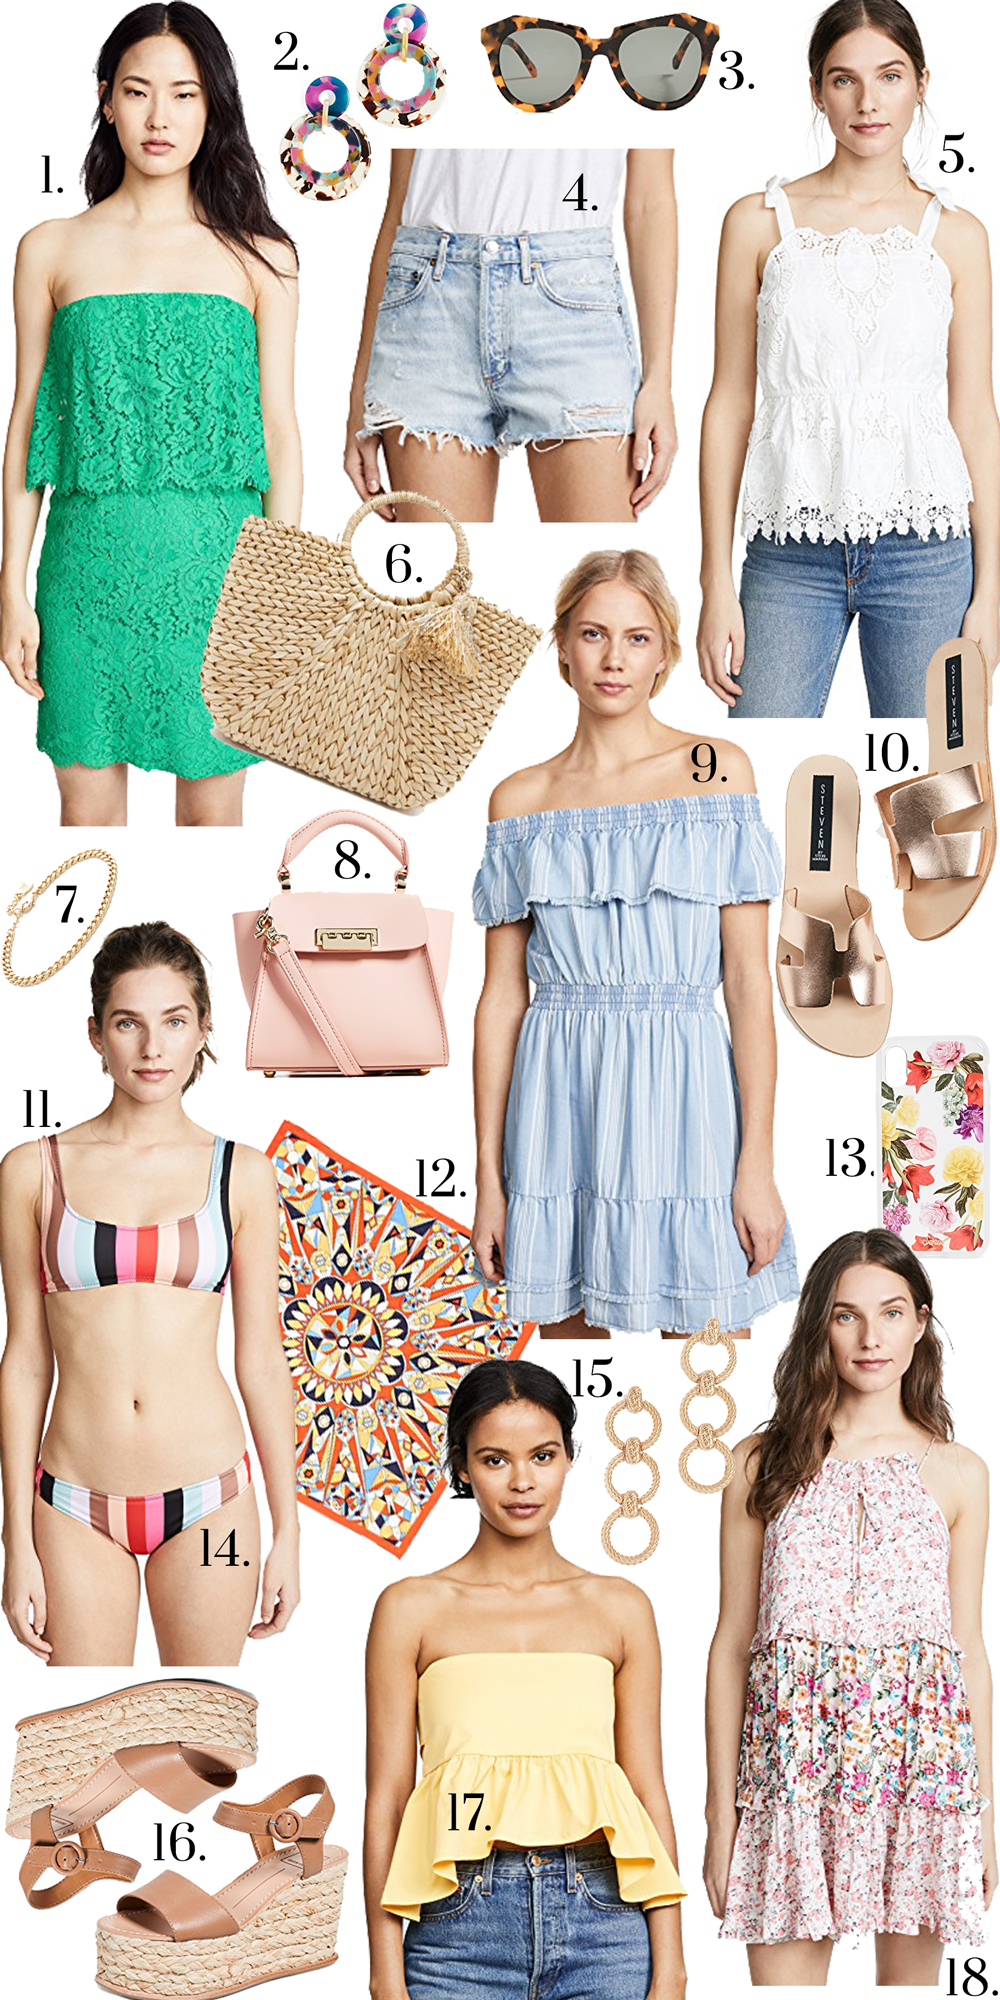 Shopbop Spring Sale / Up to 25% off spring must haves